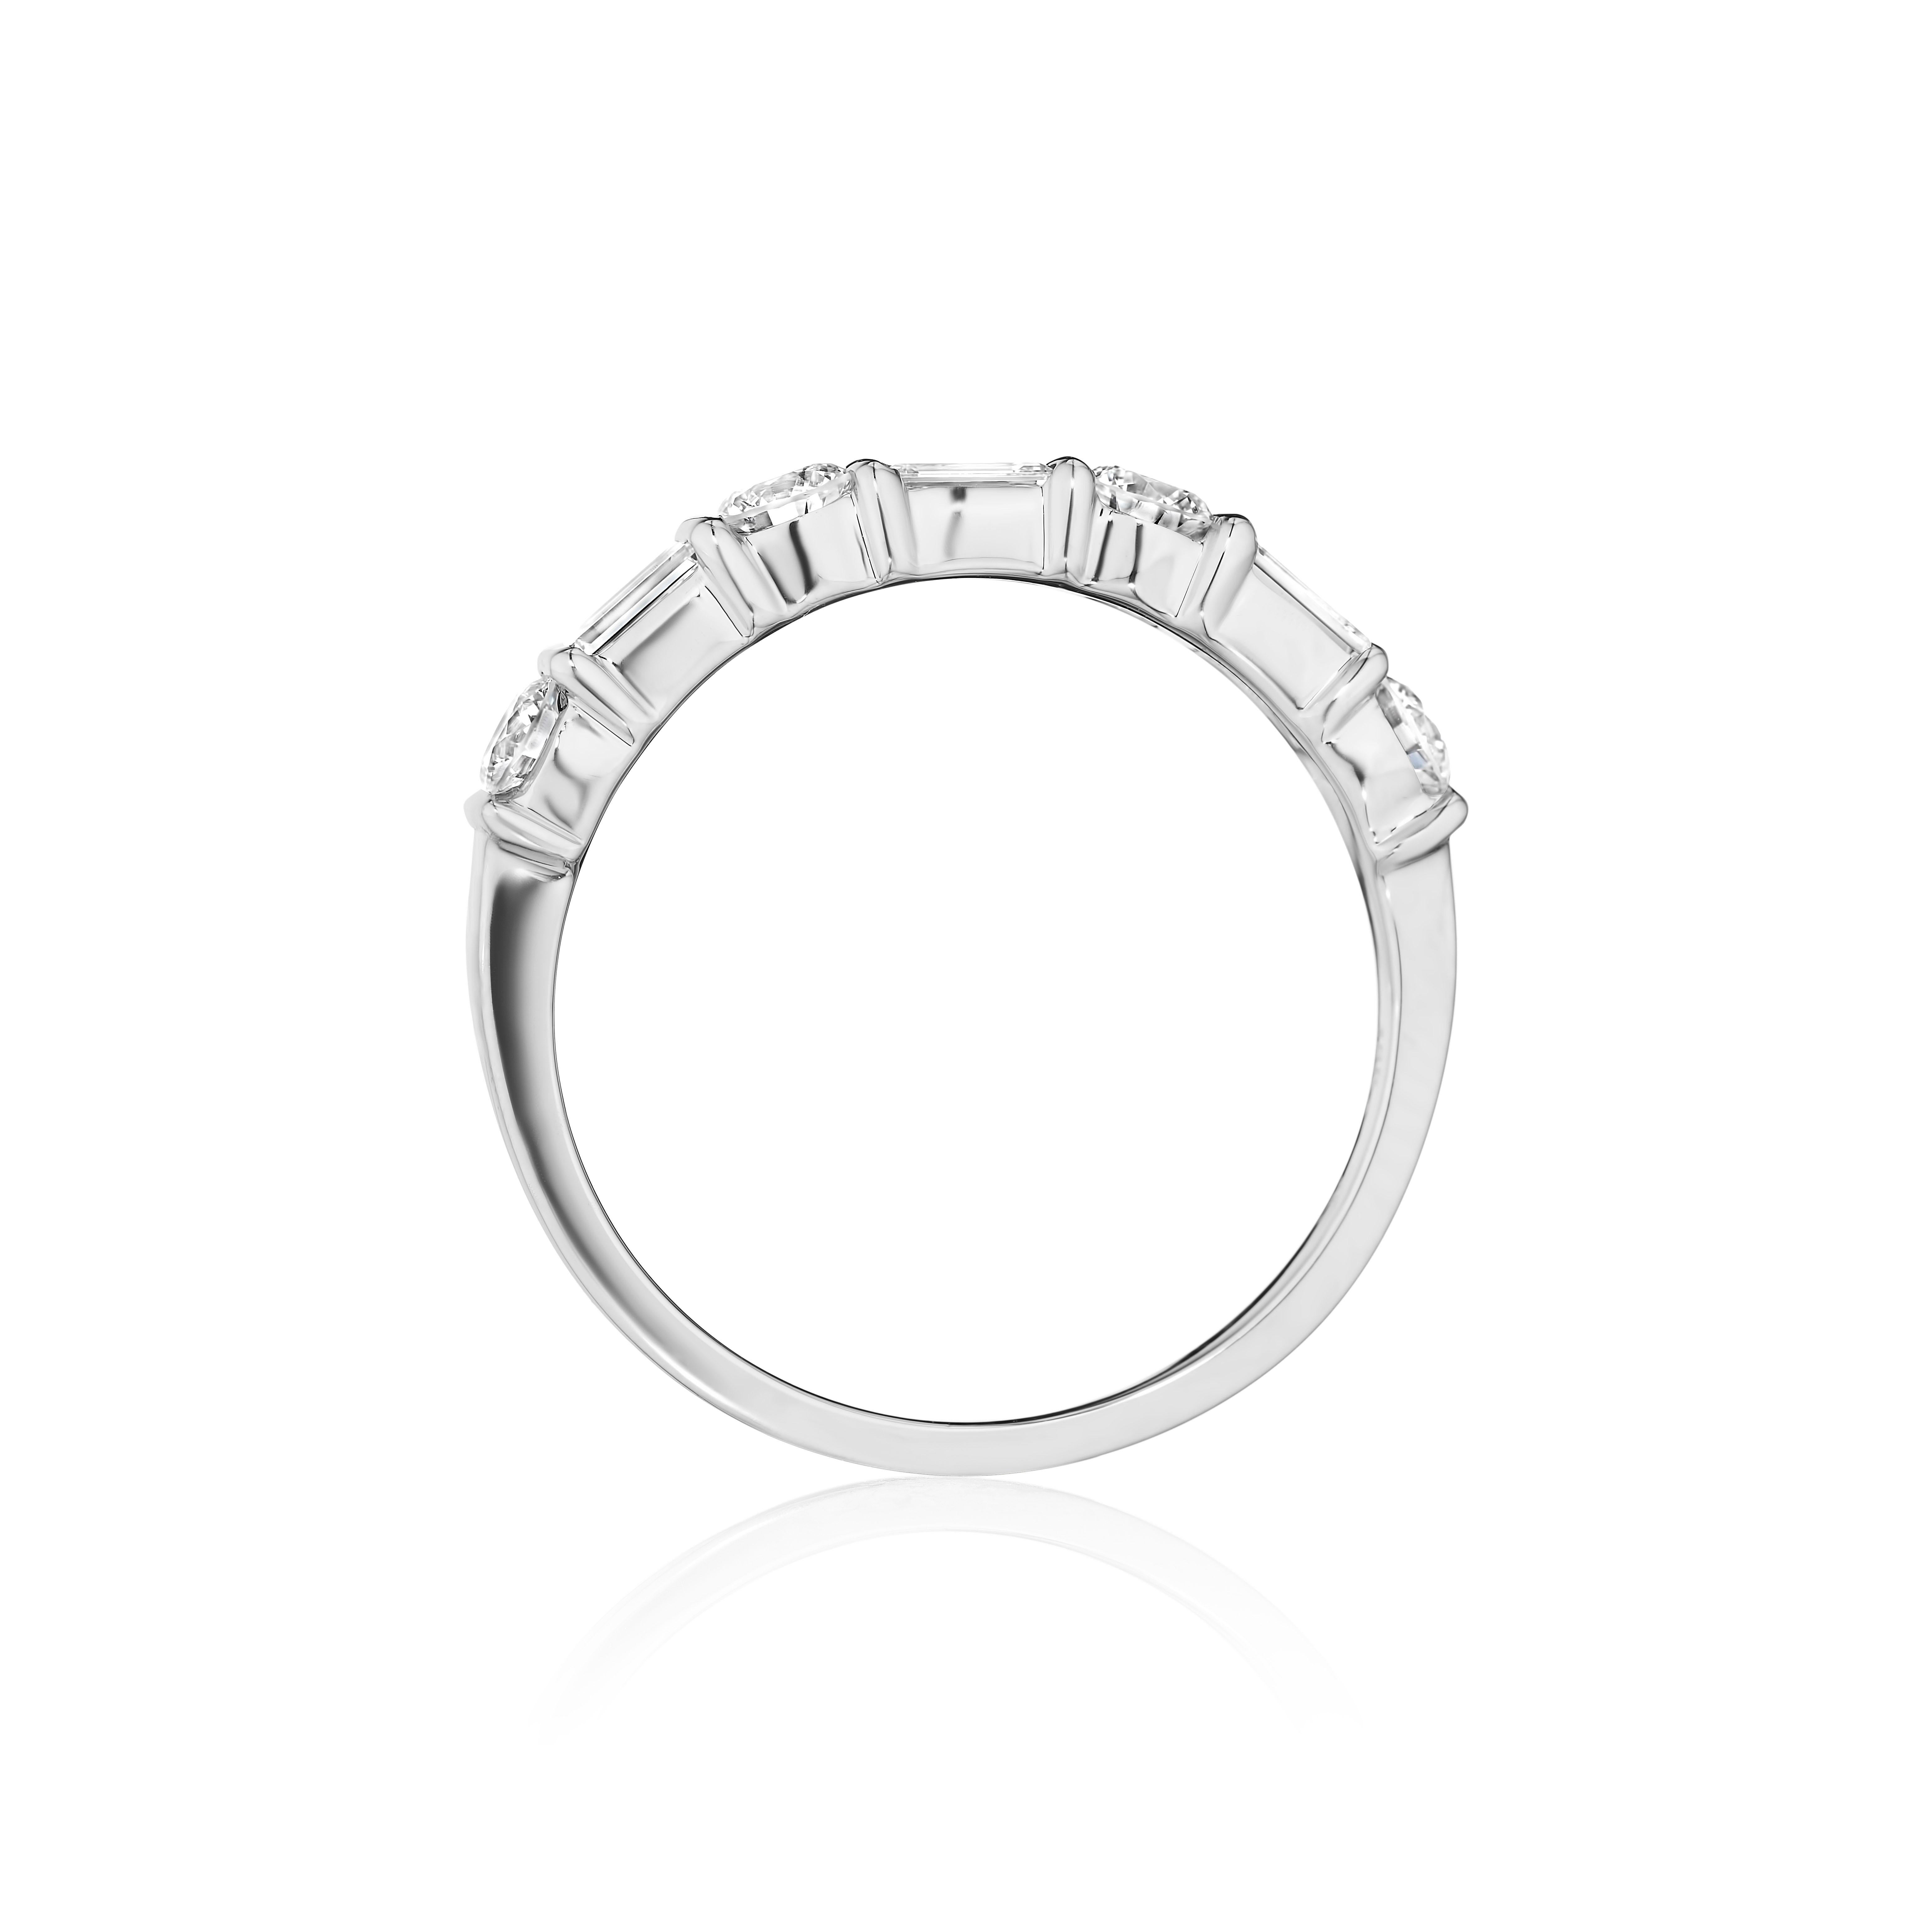 • Crafted in 18KT gold, this band is made with 7 alternating baguette and round cut diamonds, and has a combining total weight of approximately 0.75 carats. The diamonds are set into a bar setting. Worn beautifully on its own or stacked. A beautiful